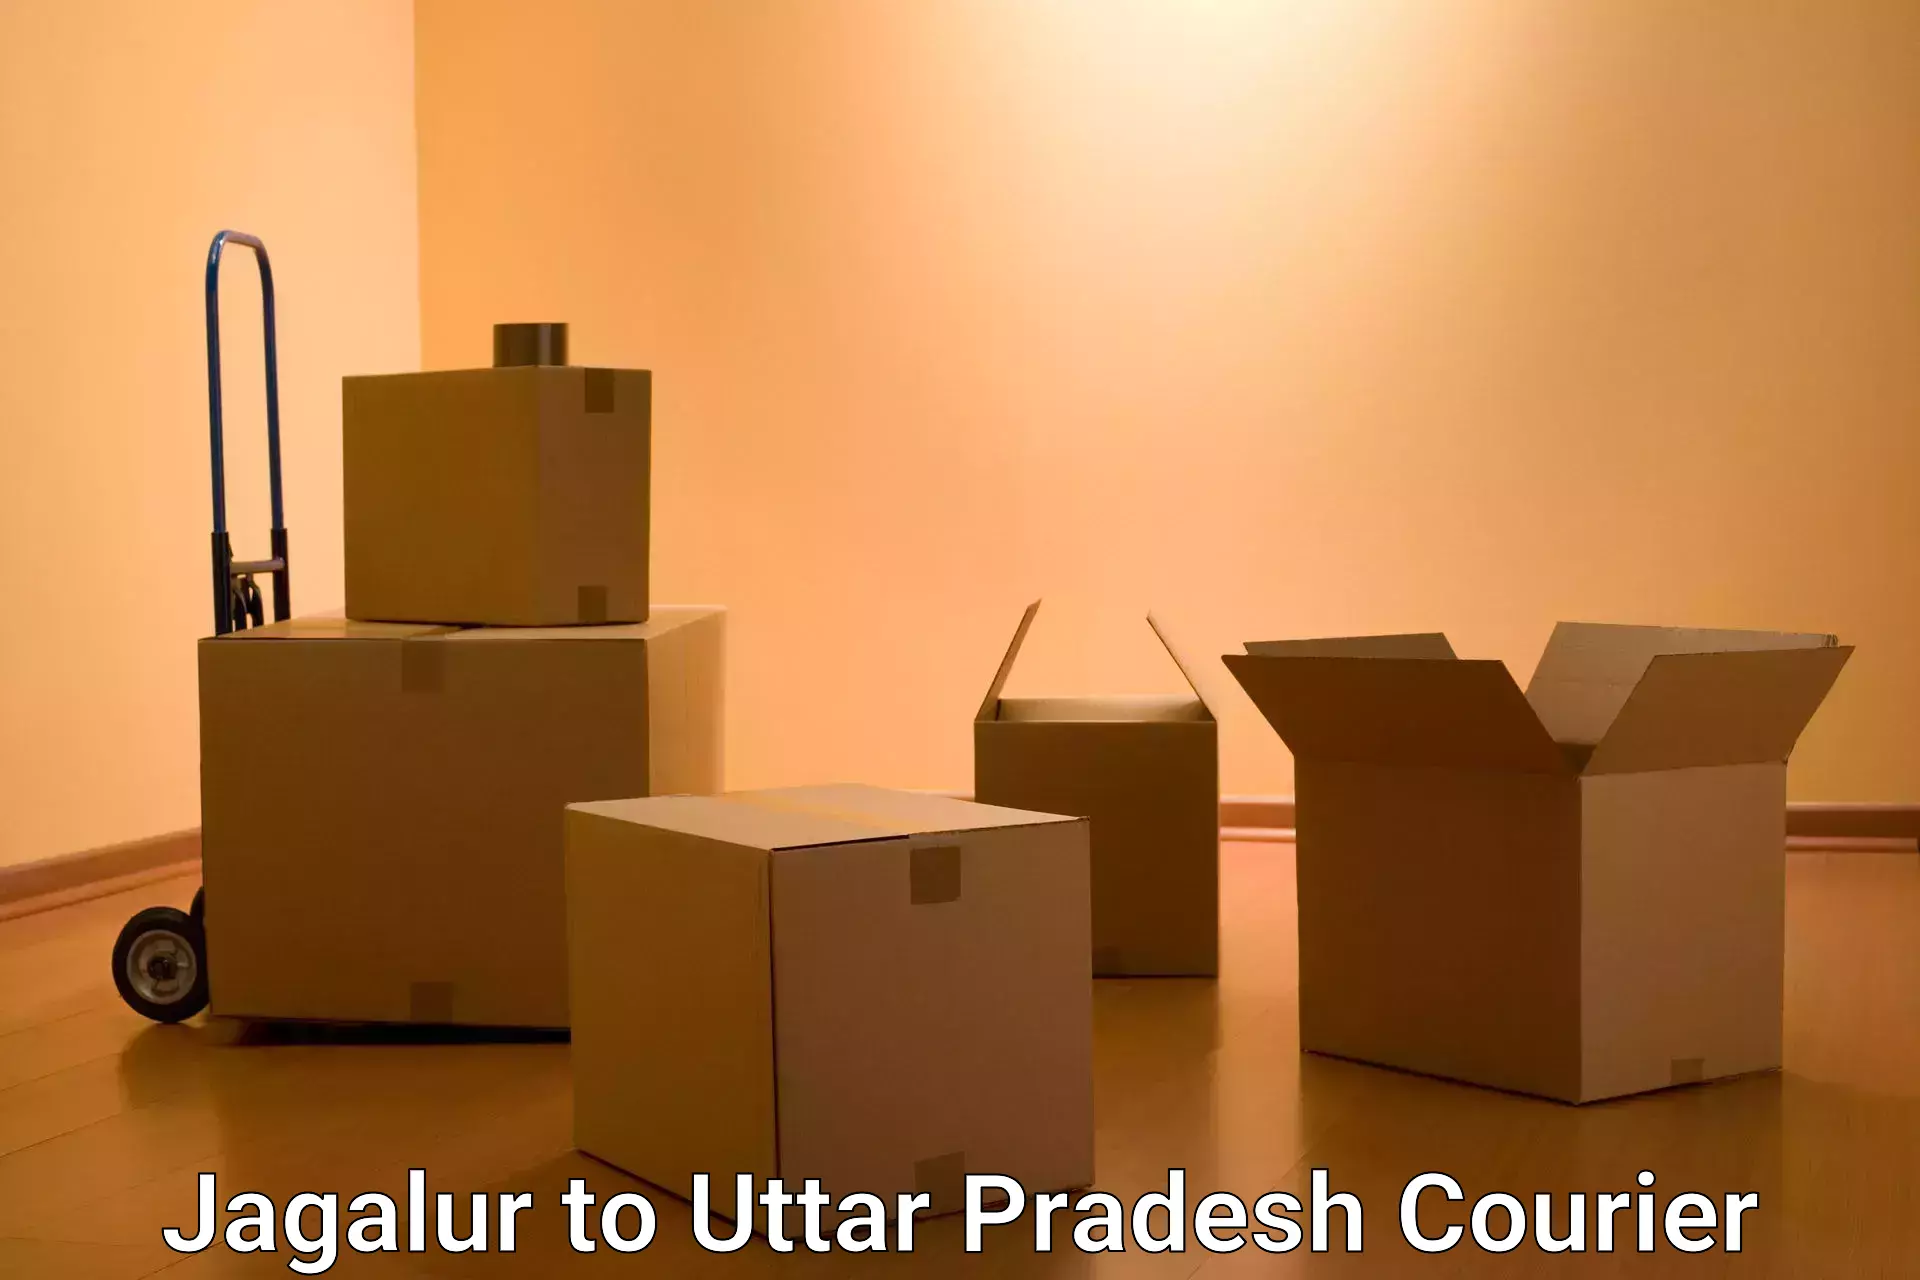 Premium courier services Jagalur to Allahabad